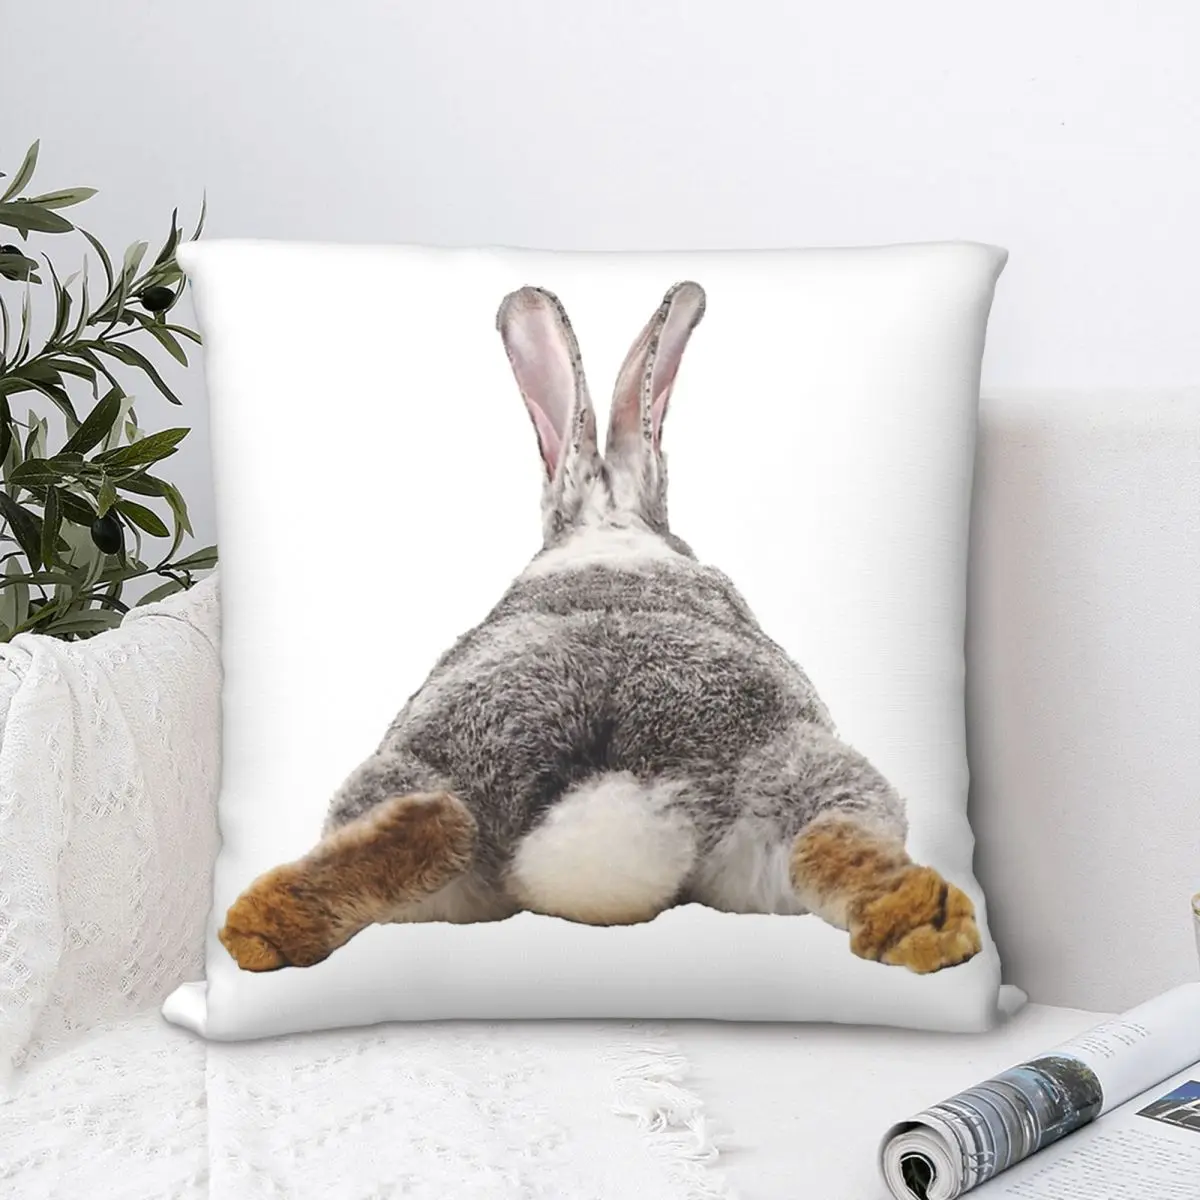 

Cute Bunny Rabbit Tail Butt Image Picture Throw Pillow Case Backpack Hugpillow Covers DIY Printed Washable Chair Decor